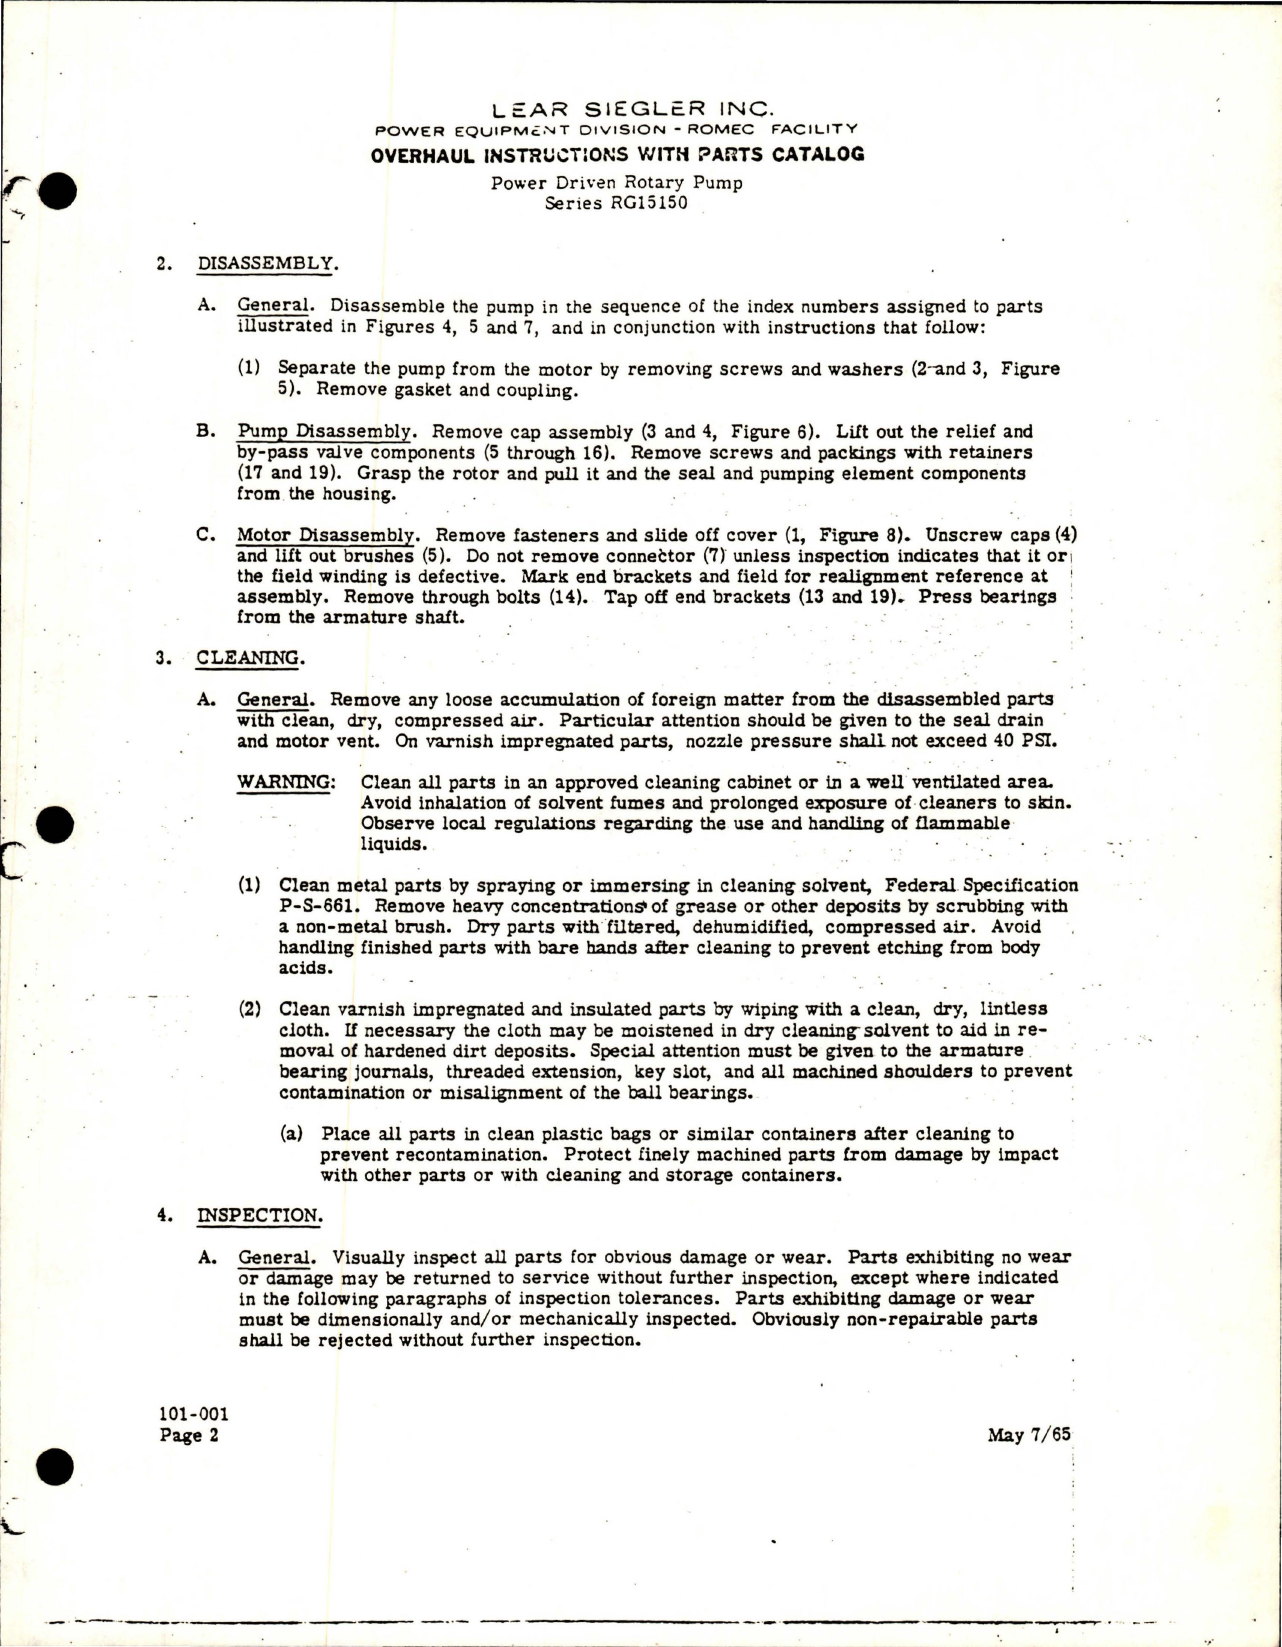 Sample page 9 from AirCorps Library document: Overhaul Instructions with Parts Catalog for Power Driven Rotary Fuel Transfer Pump - Model RG15150 